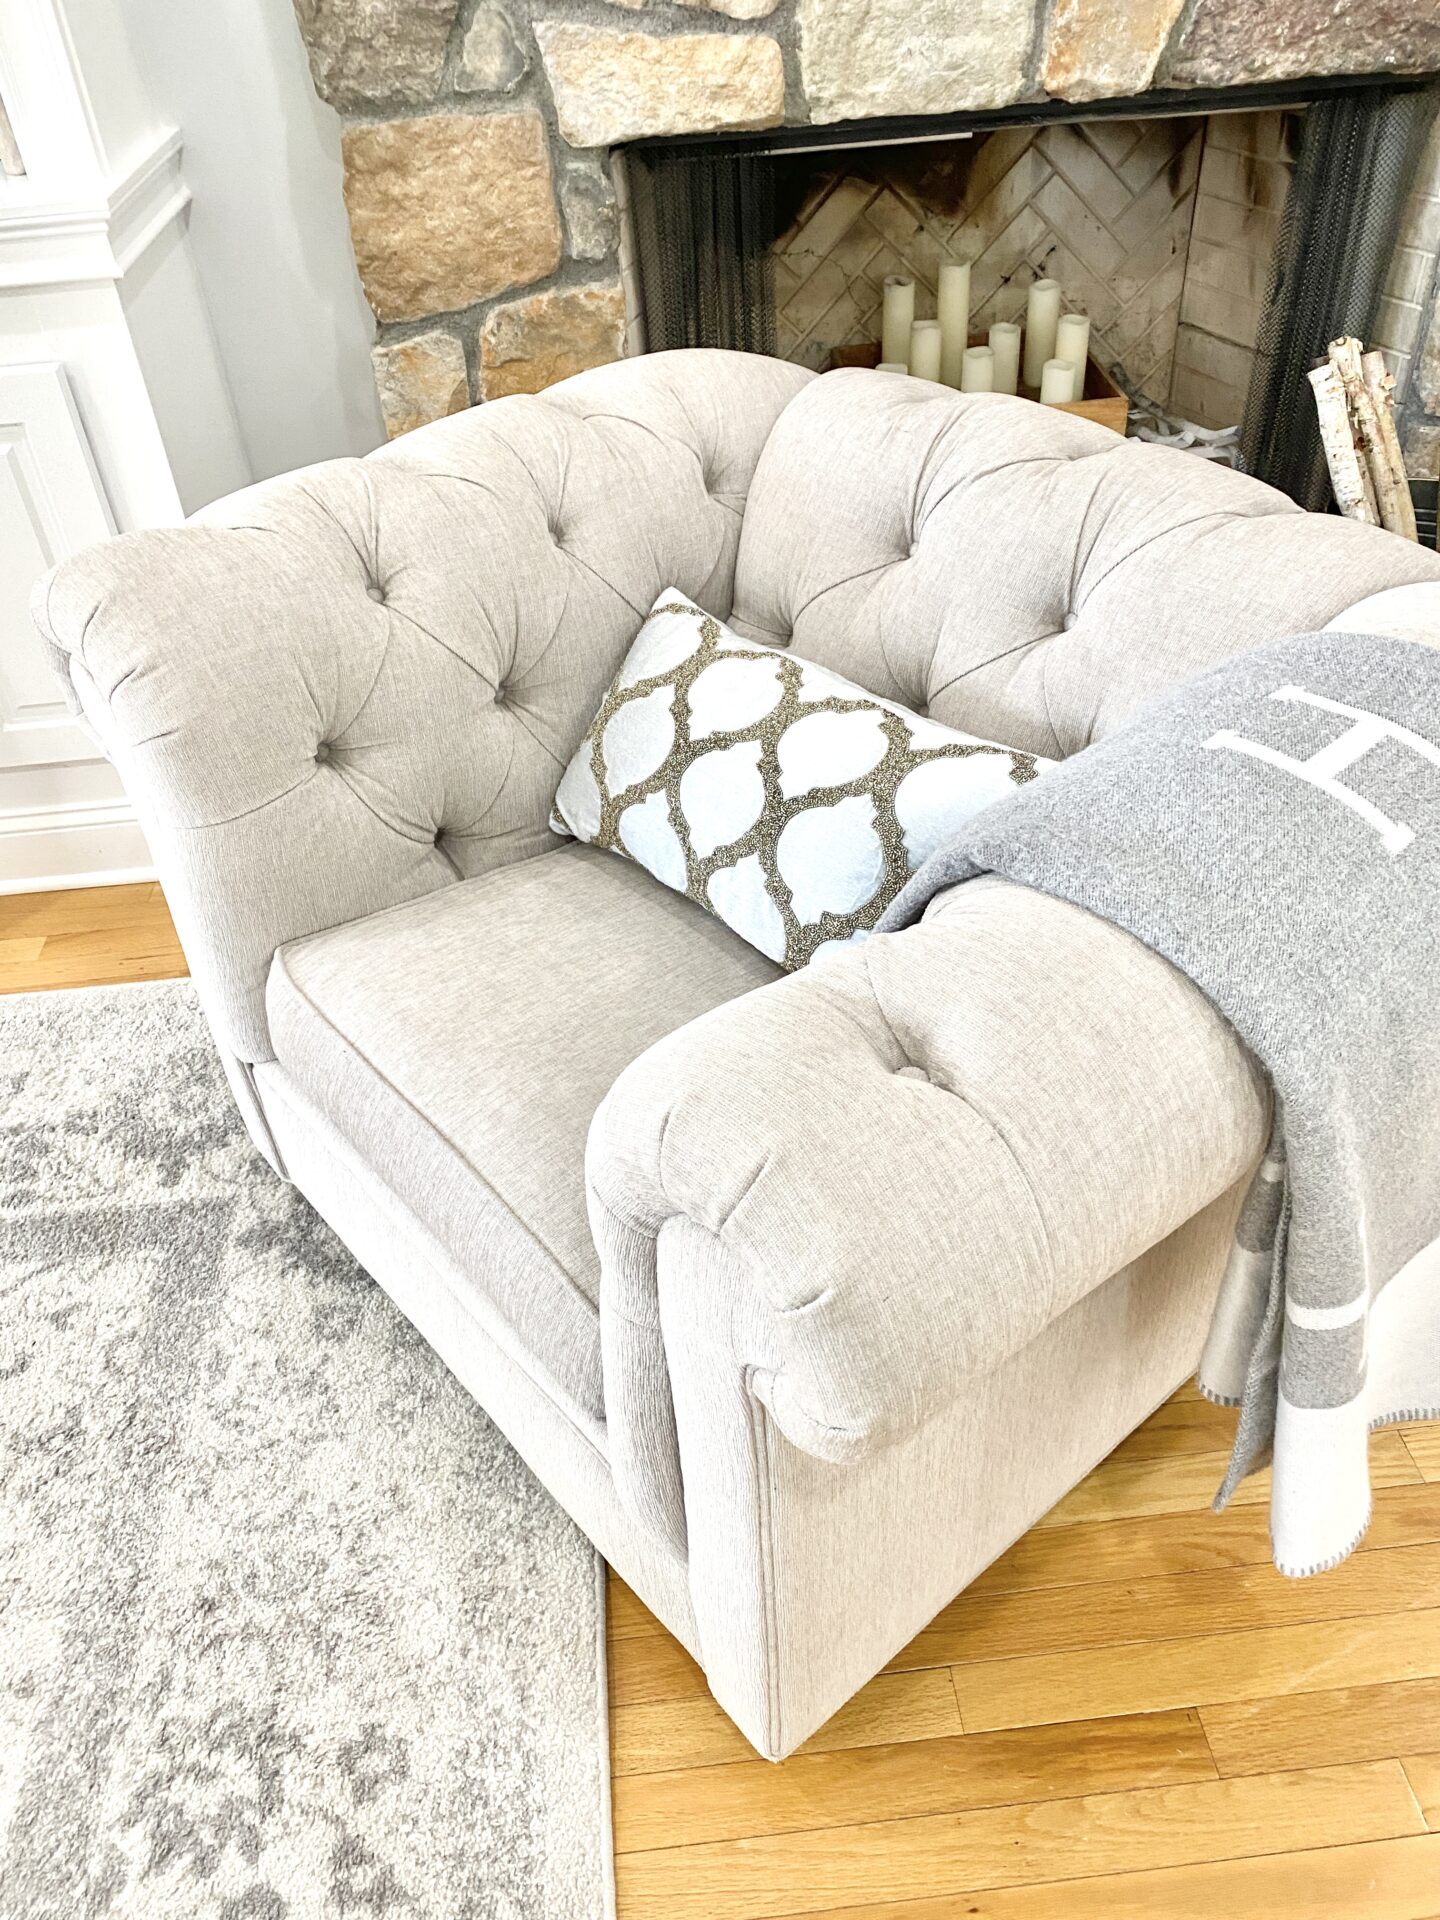 Pottery Barn Chesterfield Sofa Review